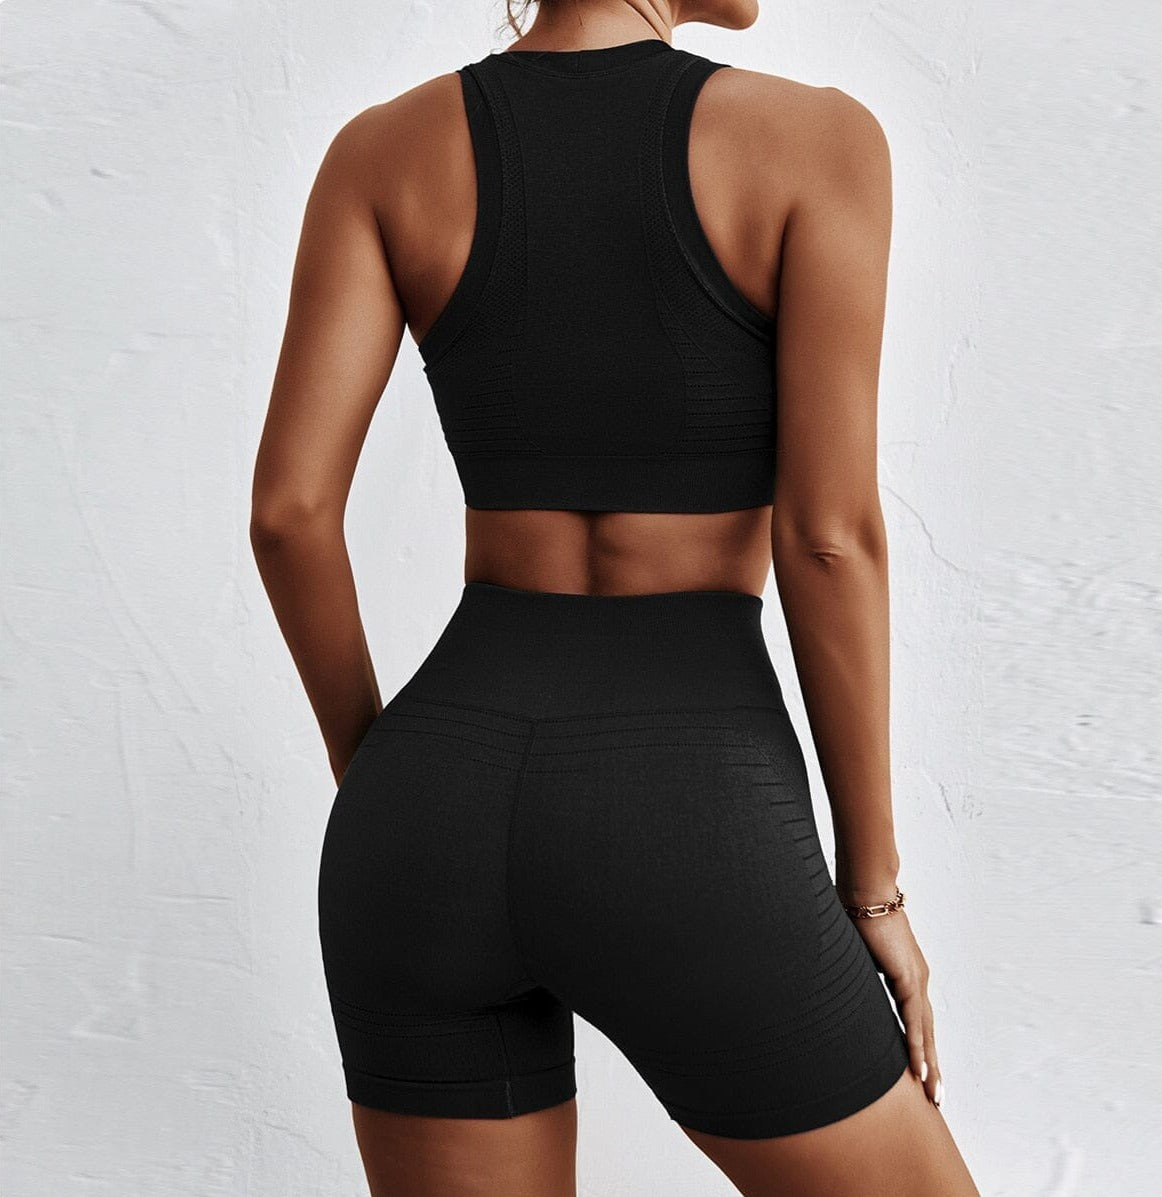 Intricate Gym Set - Shorts + Top Sets Starlethics 